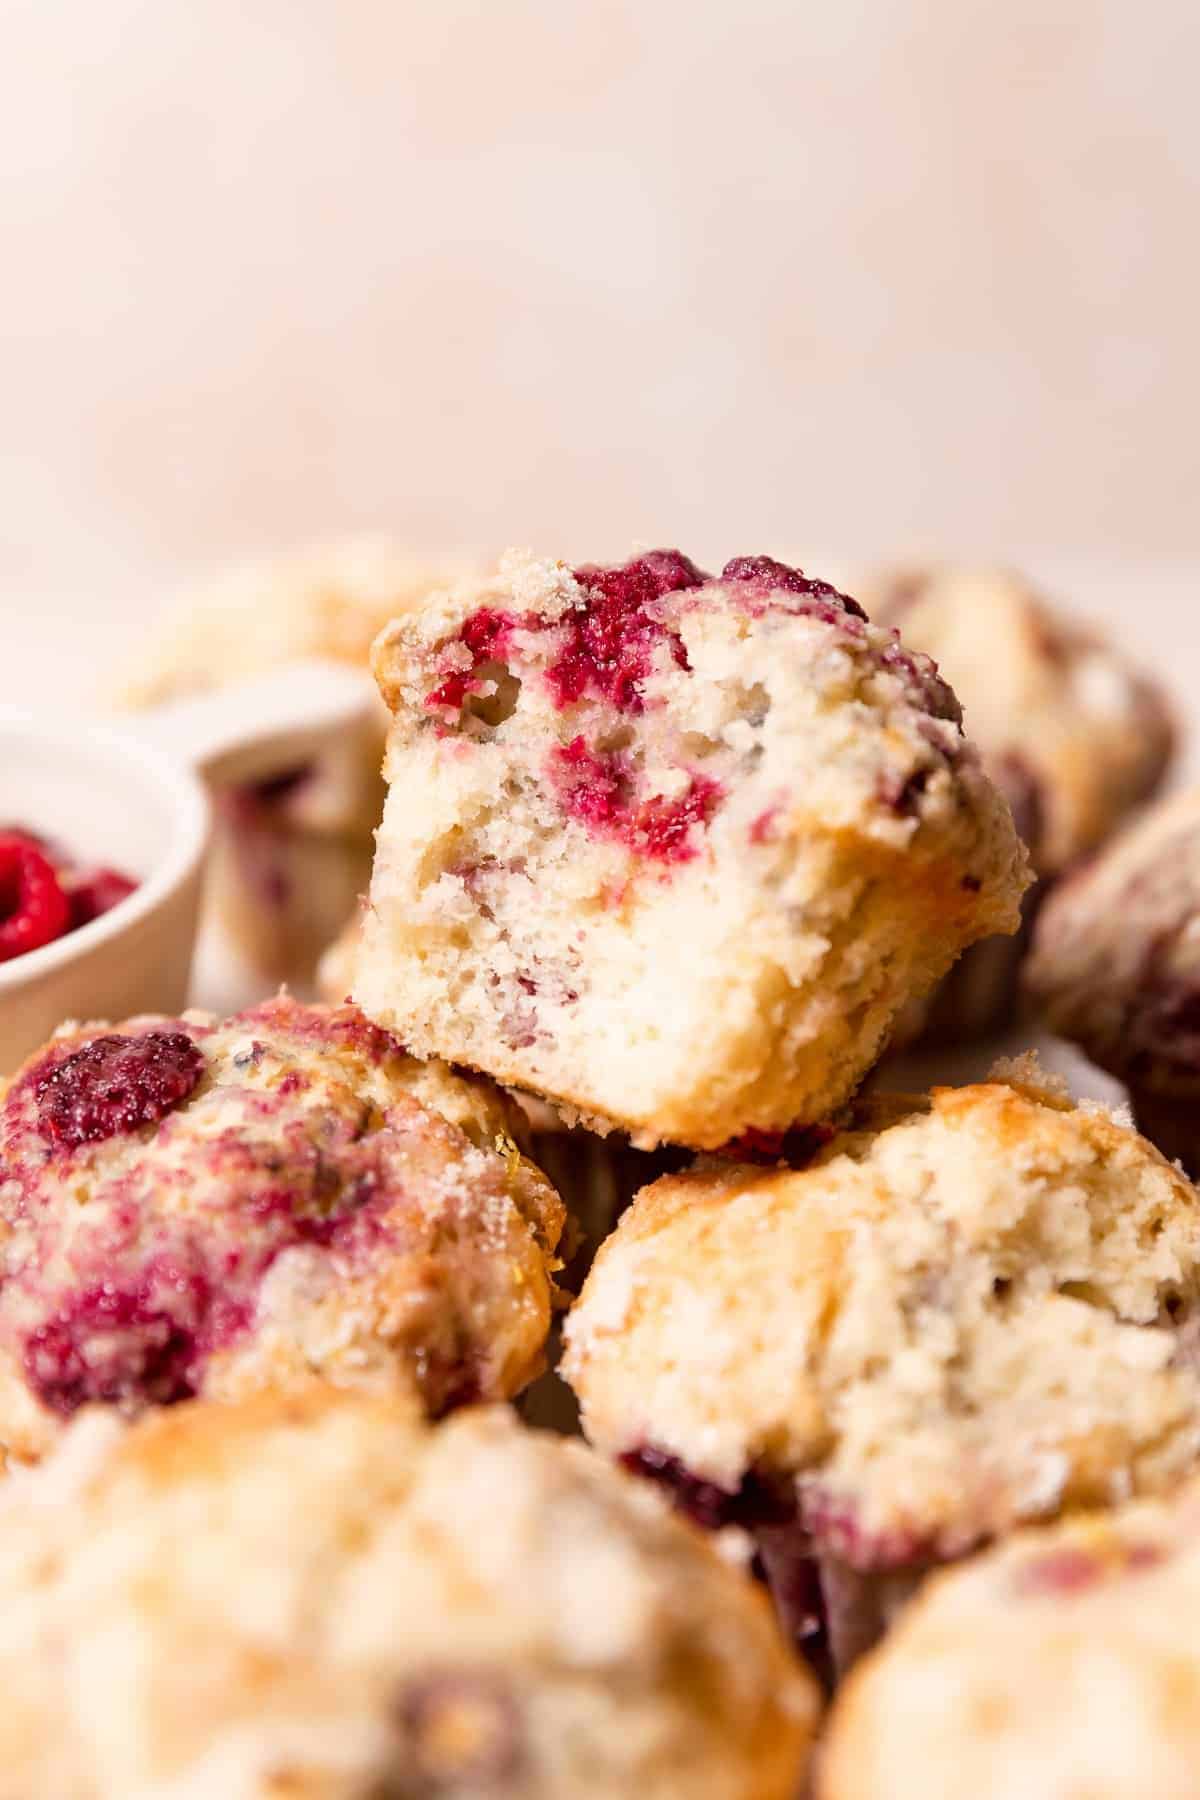 A pile of lemon raspberry muffins with the top one missing a bite to show the fluffy texture.